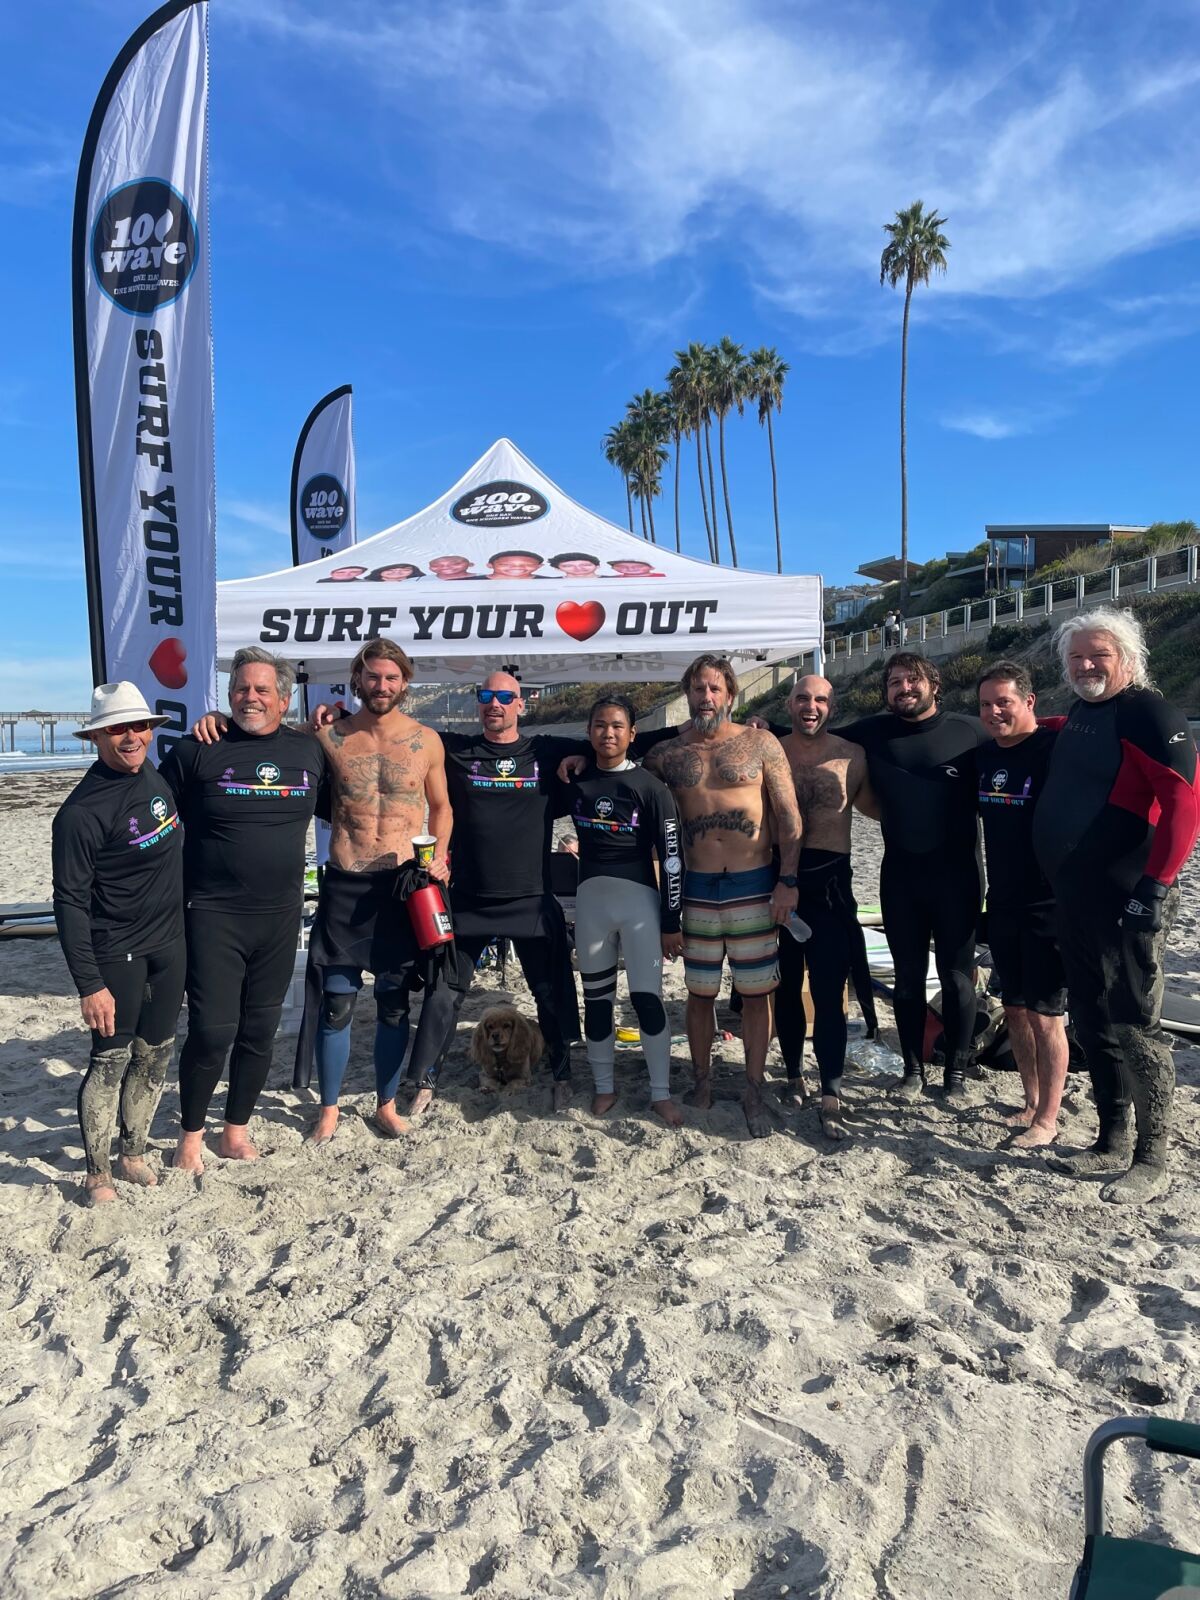 Members of the Soledad Surf Rats and Original Gangsters get together at La Jolla's Scripps Beach for the 100 Wave Challenge.